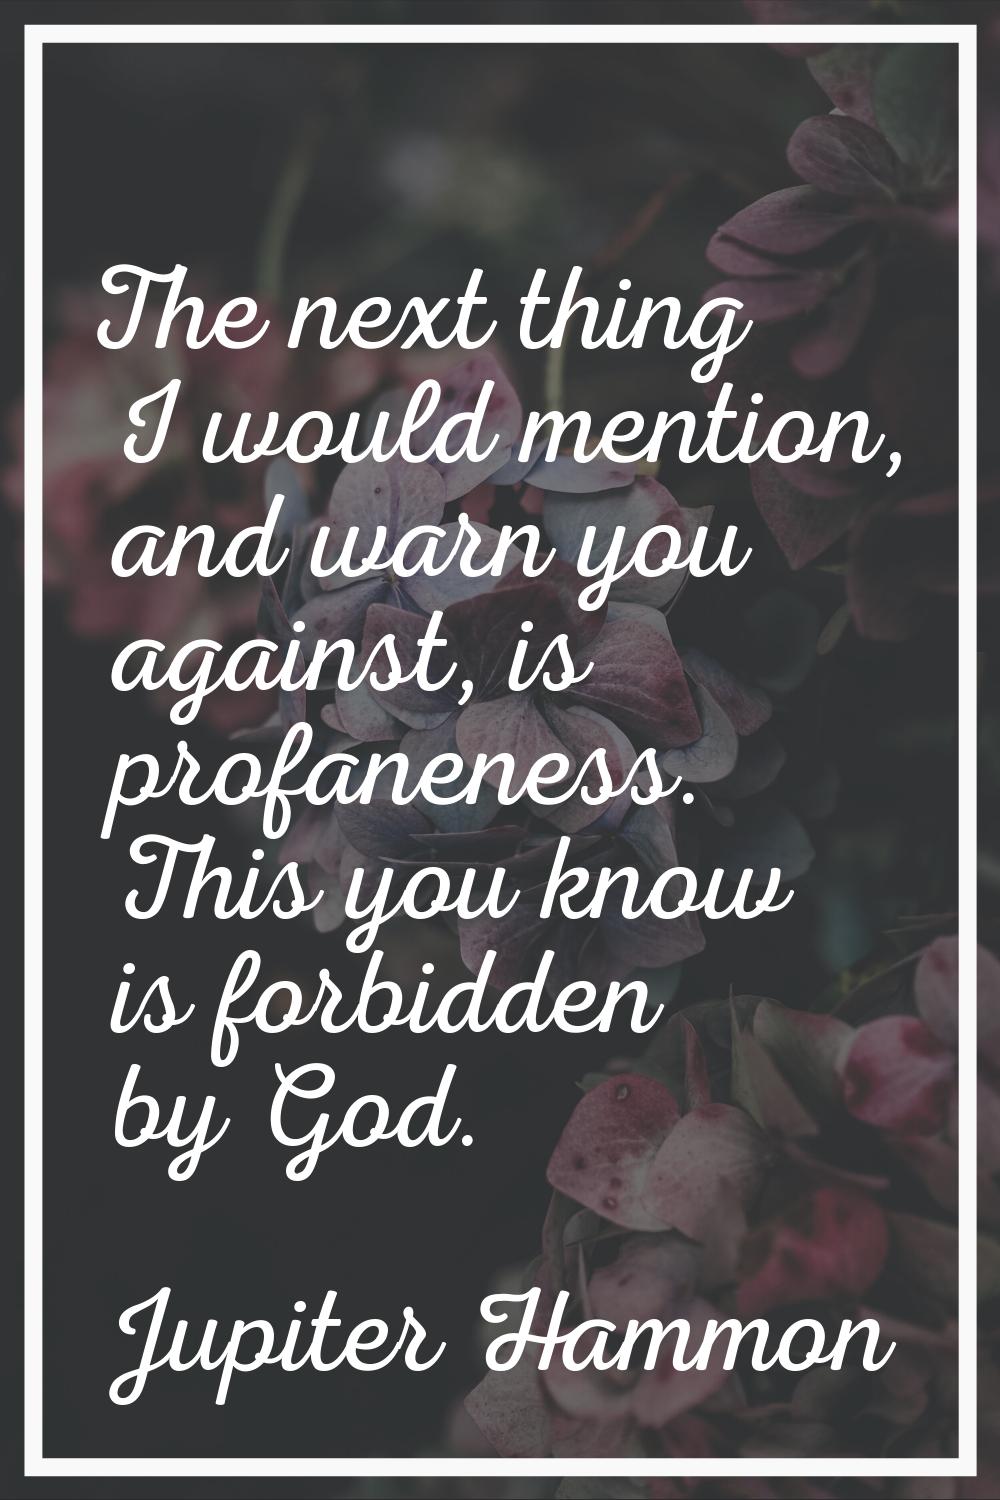 The next thing I would mention, and warn you against, is profaneness. This you know is forbidden by